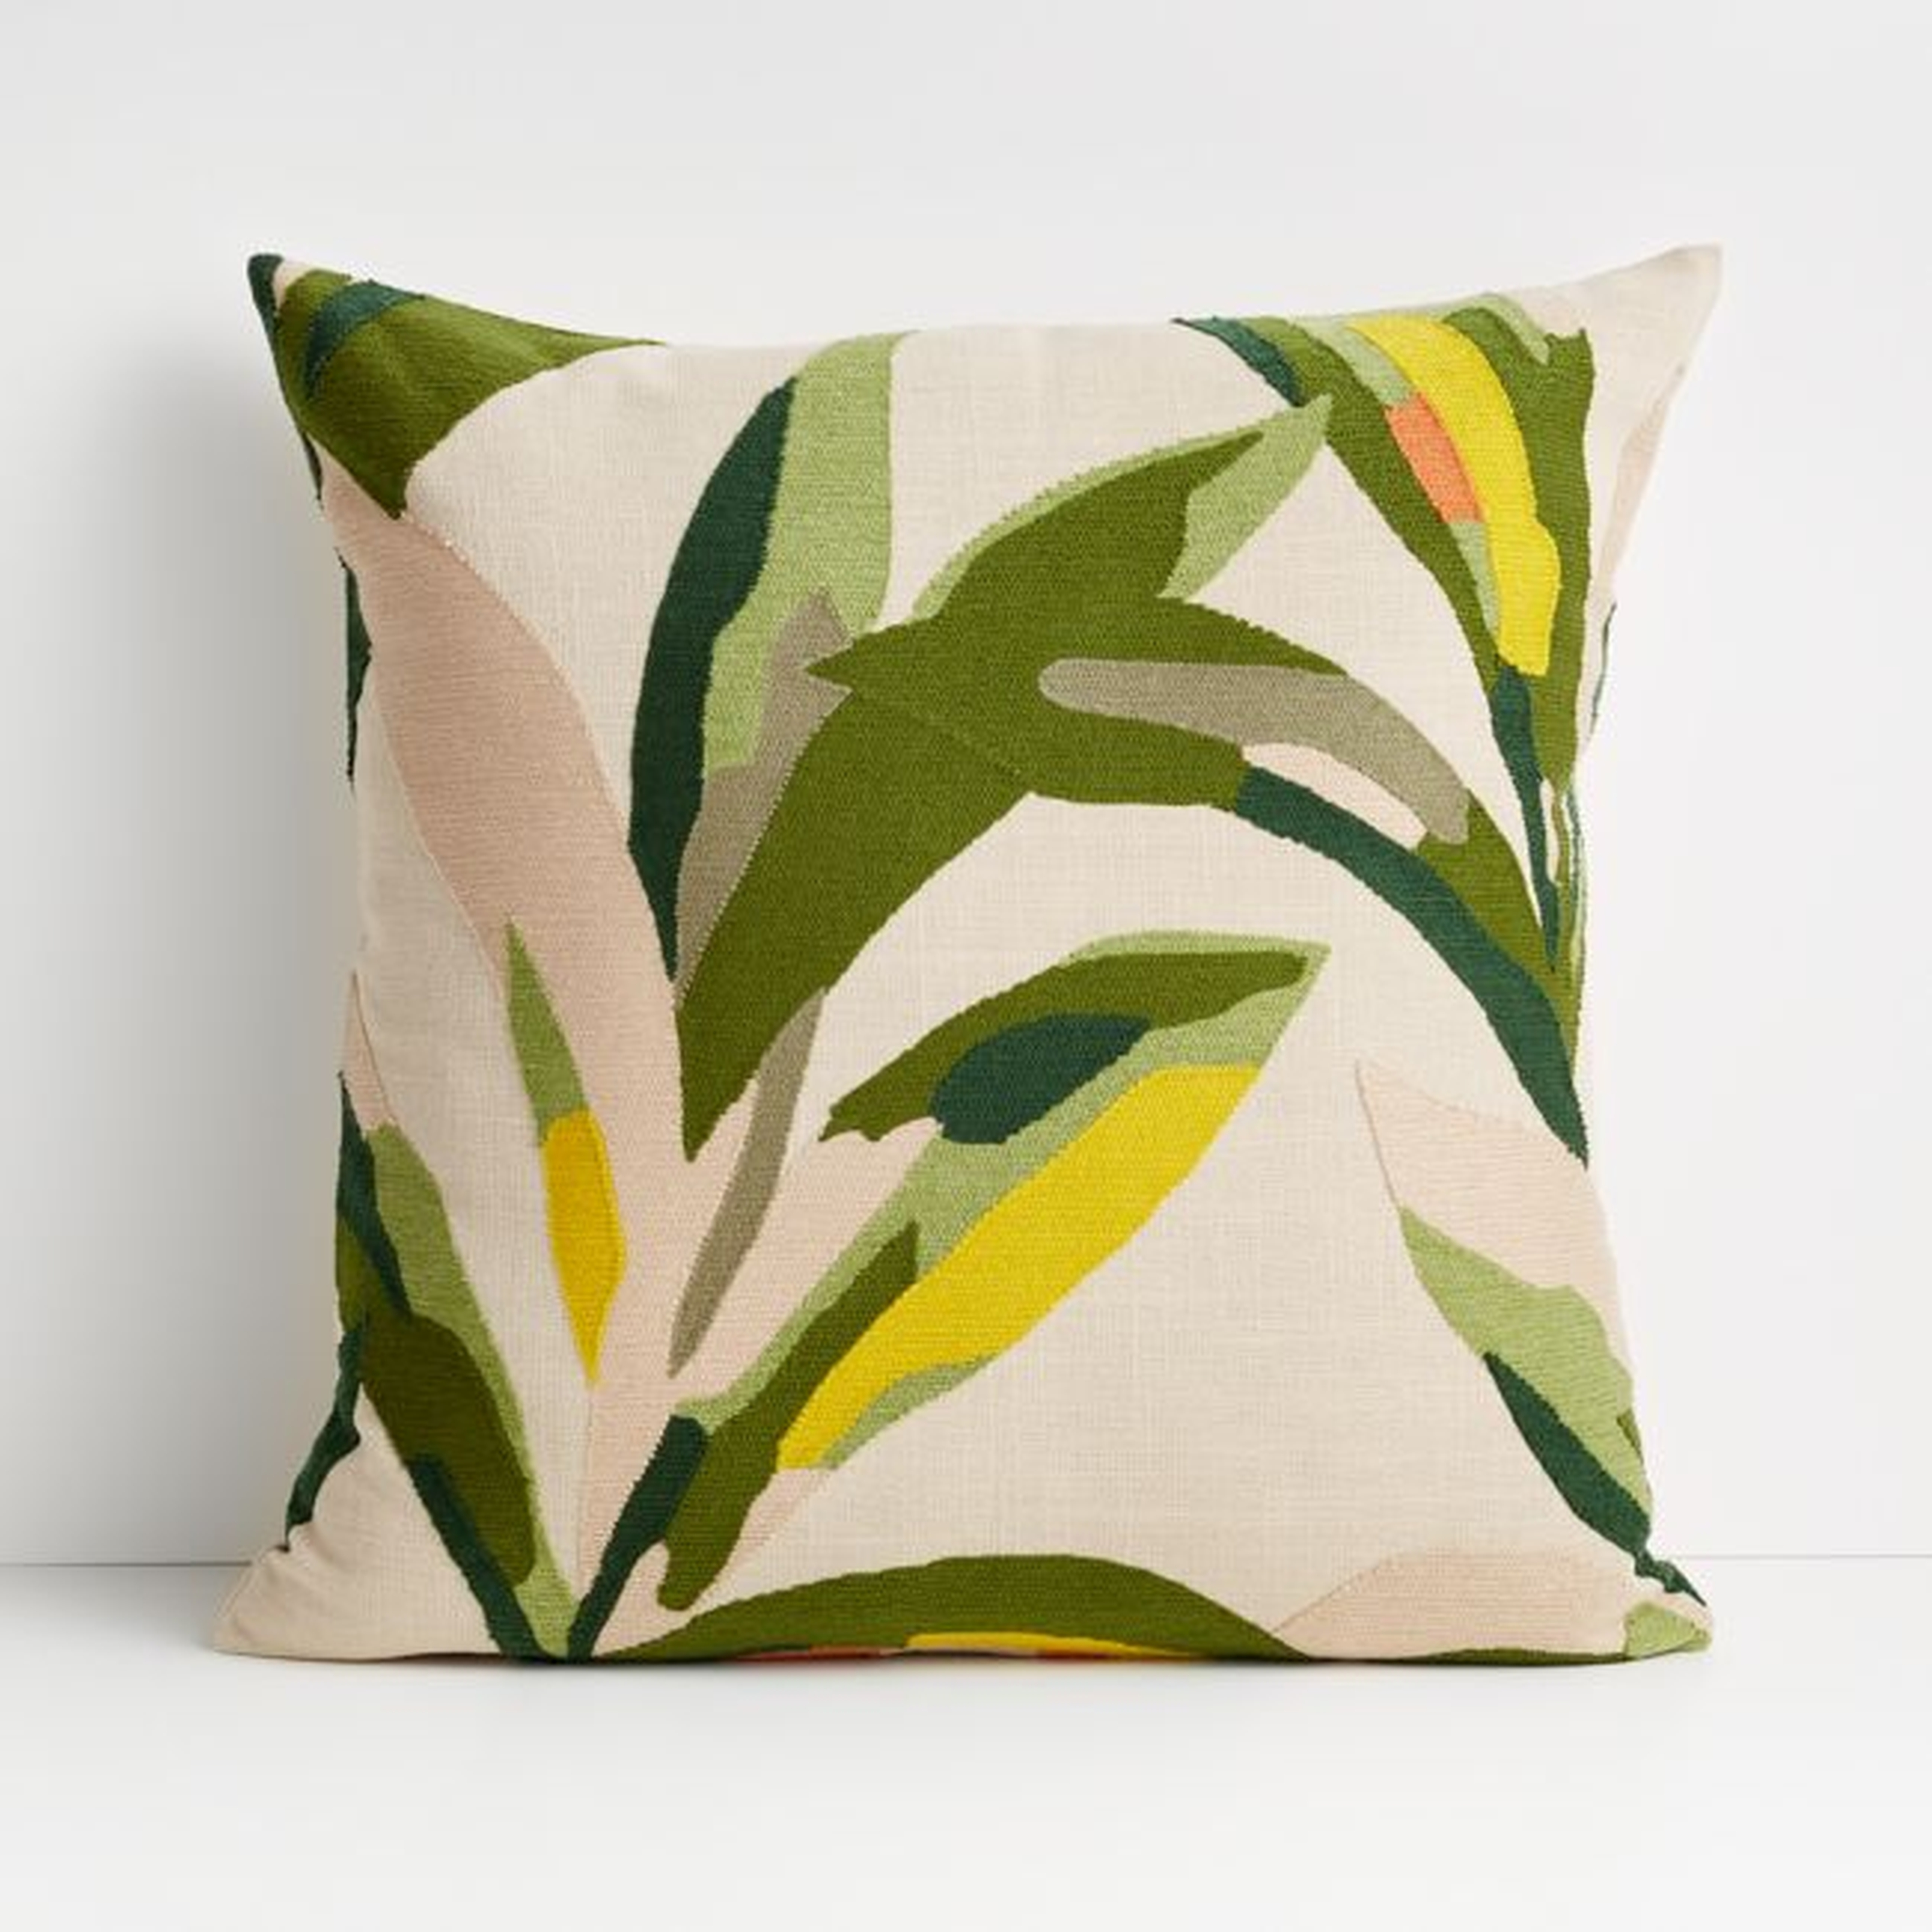 20" Palma Leaf Pillow with Feather-Down Insert - Crate and Barrel